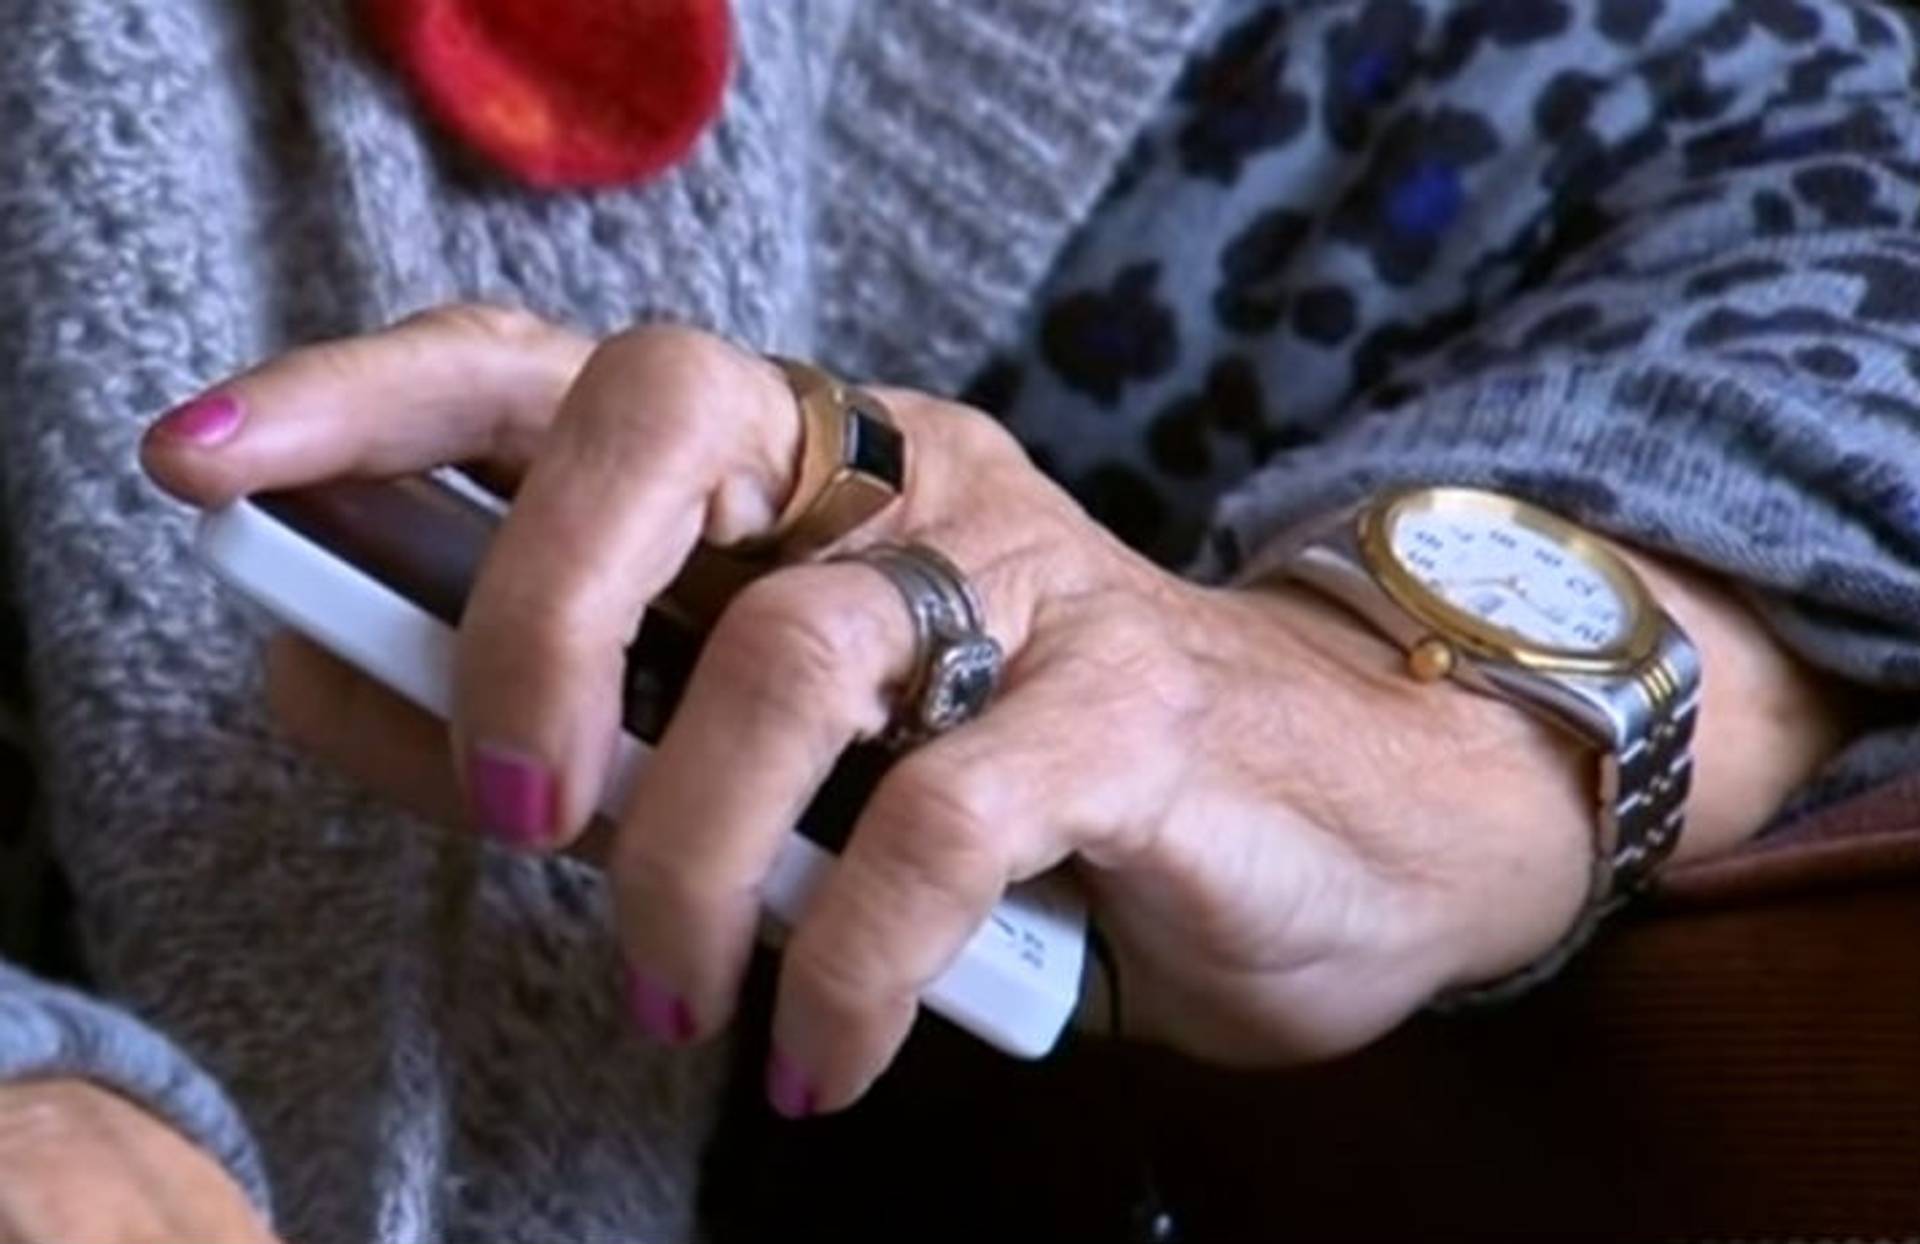 A screen-less phone for the elderly